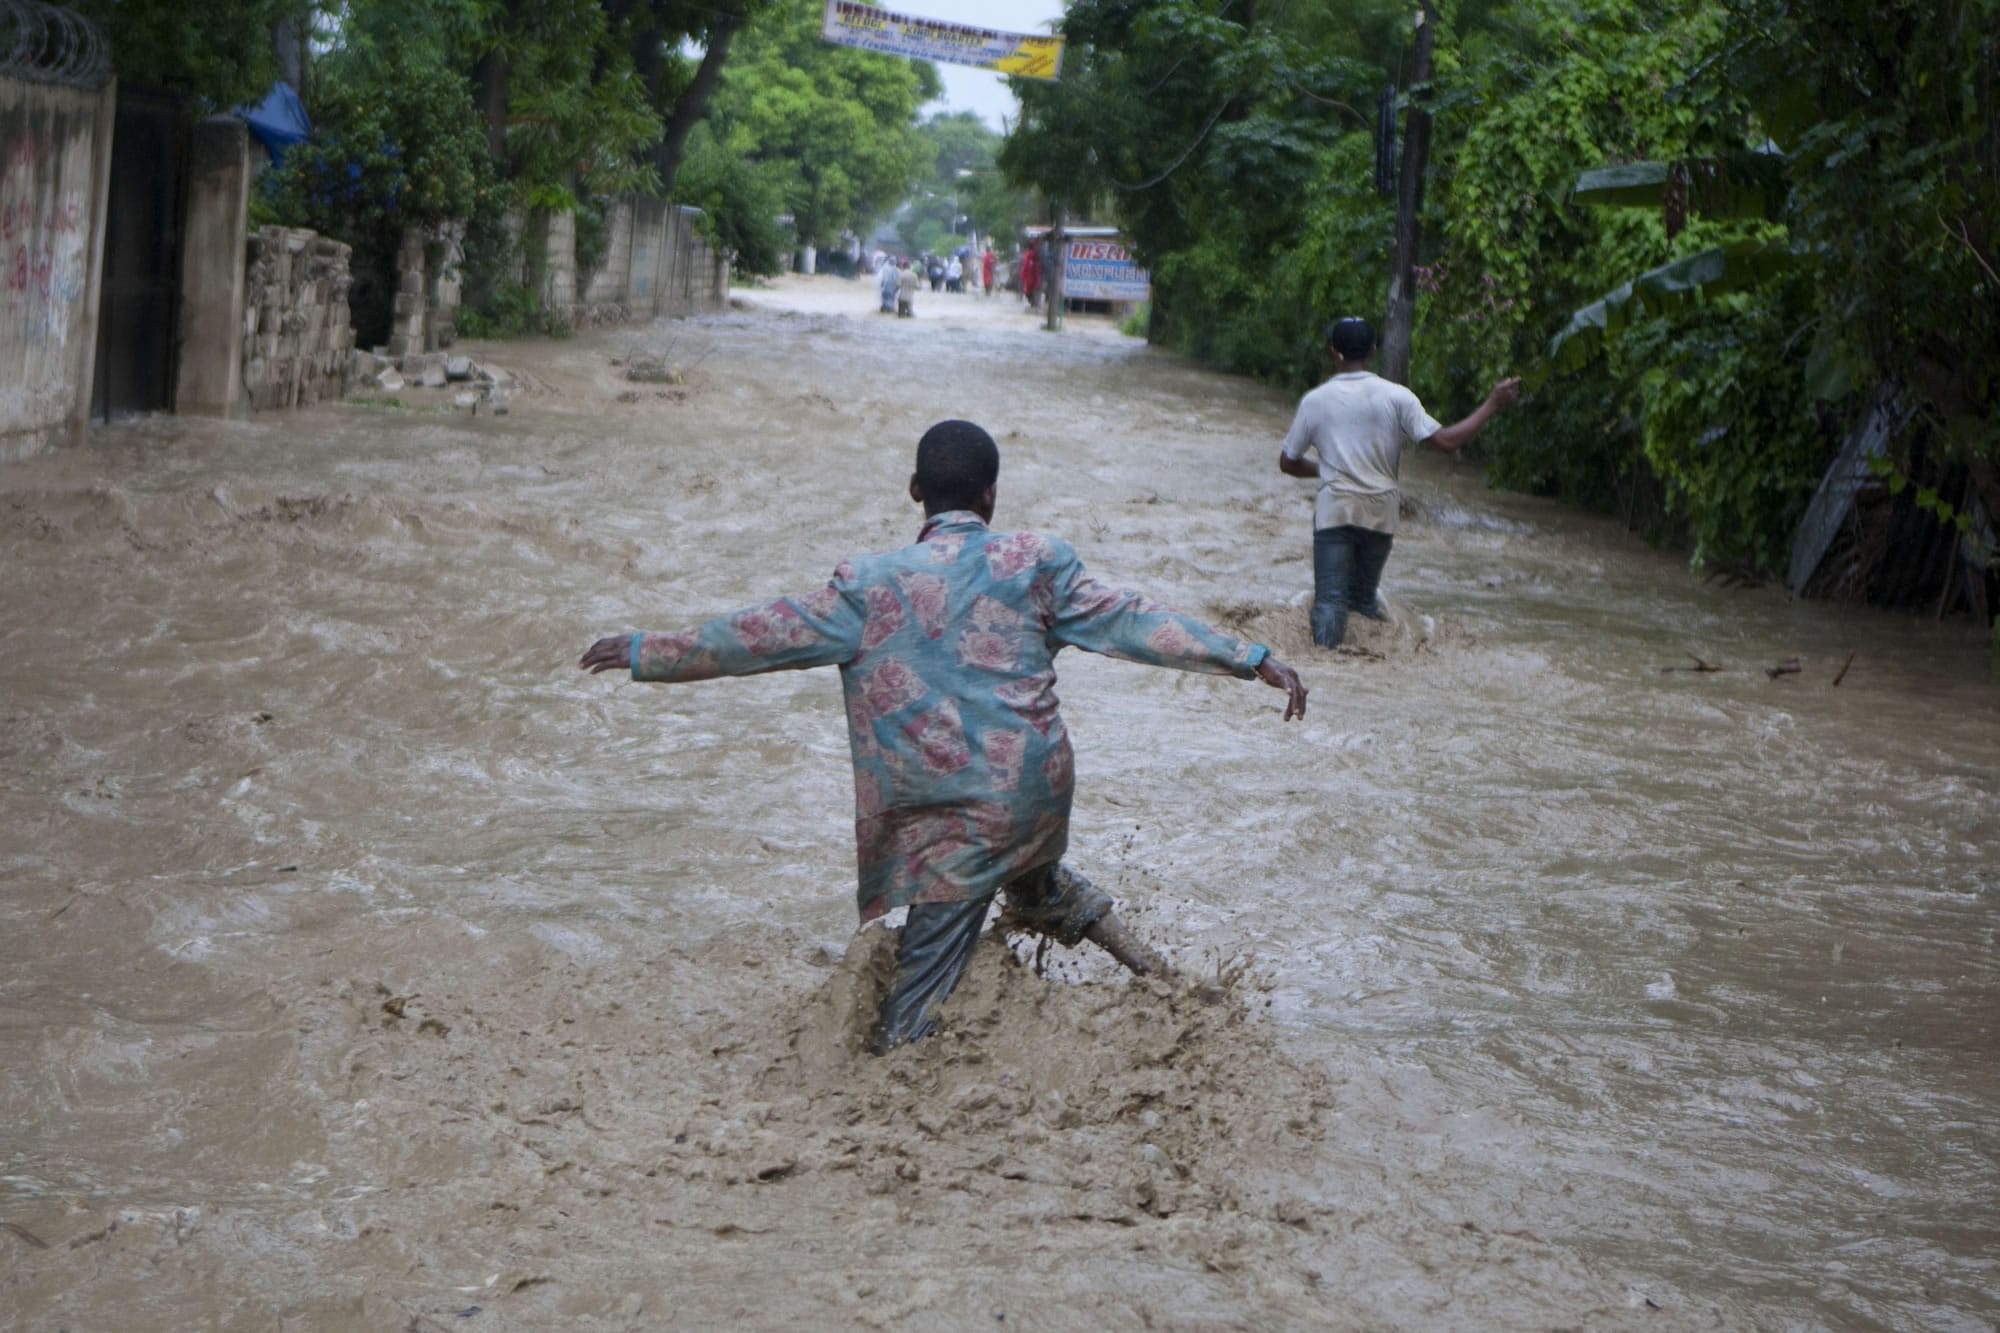 Residents wade through a flooded street caused by heavy rains from Hurricane Sandy in Port-au-Prince, Haiti, Thursday, Oct. 25, 2012. Hurricane Sandy rumbled across mountainous eastern Cuba and headed toward the Bahamas on Thursday as a Category 2 storm, bringing heavy rains and blistering winds.